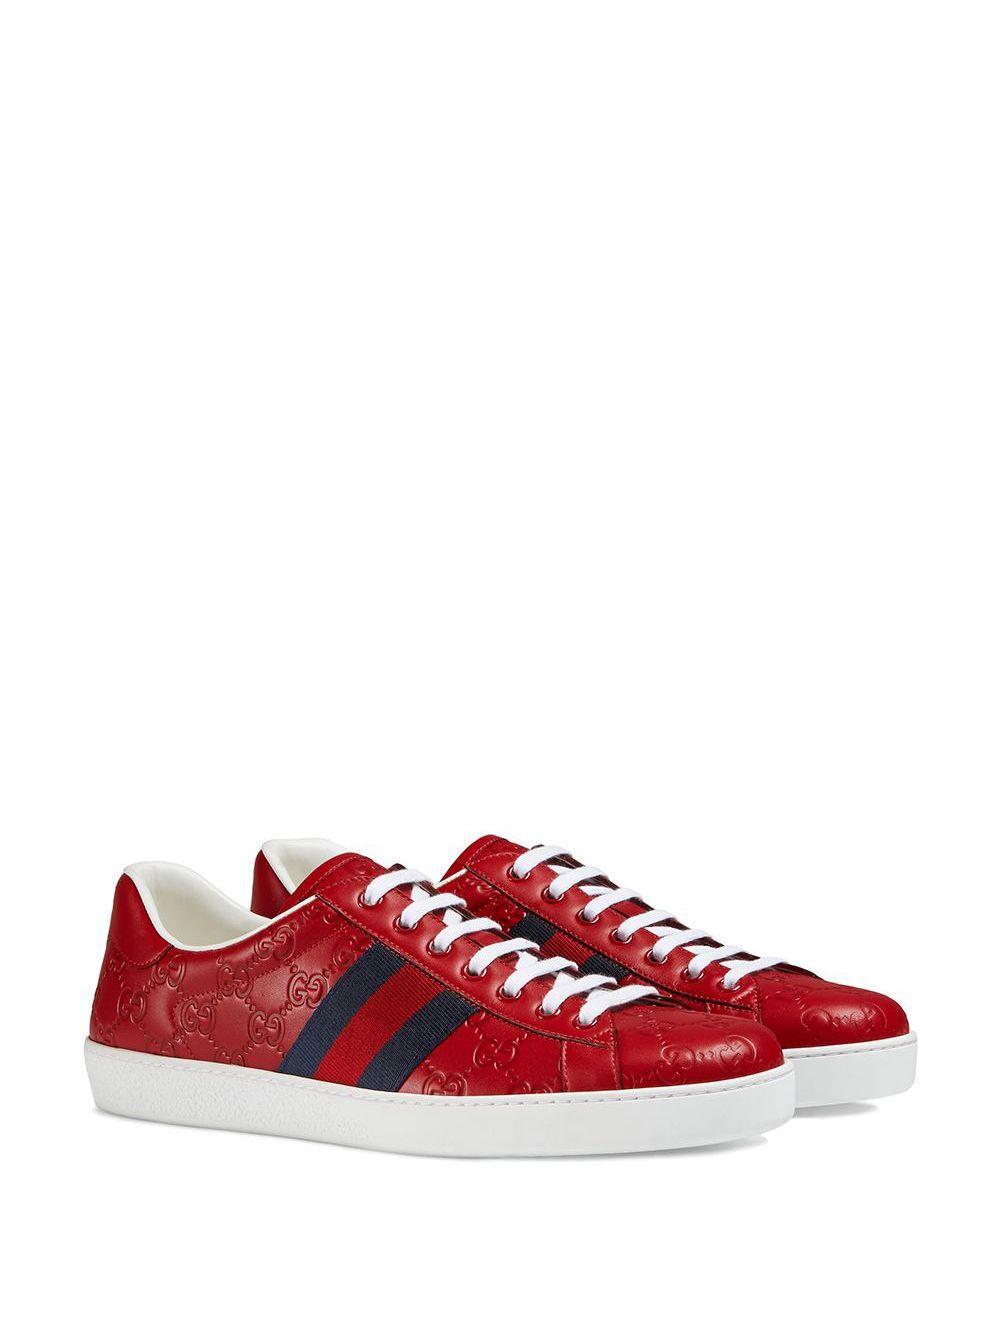 Gucci Ace Signature Sneaker in Red for Men | Lyst